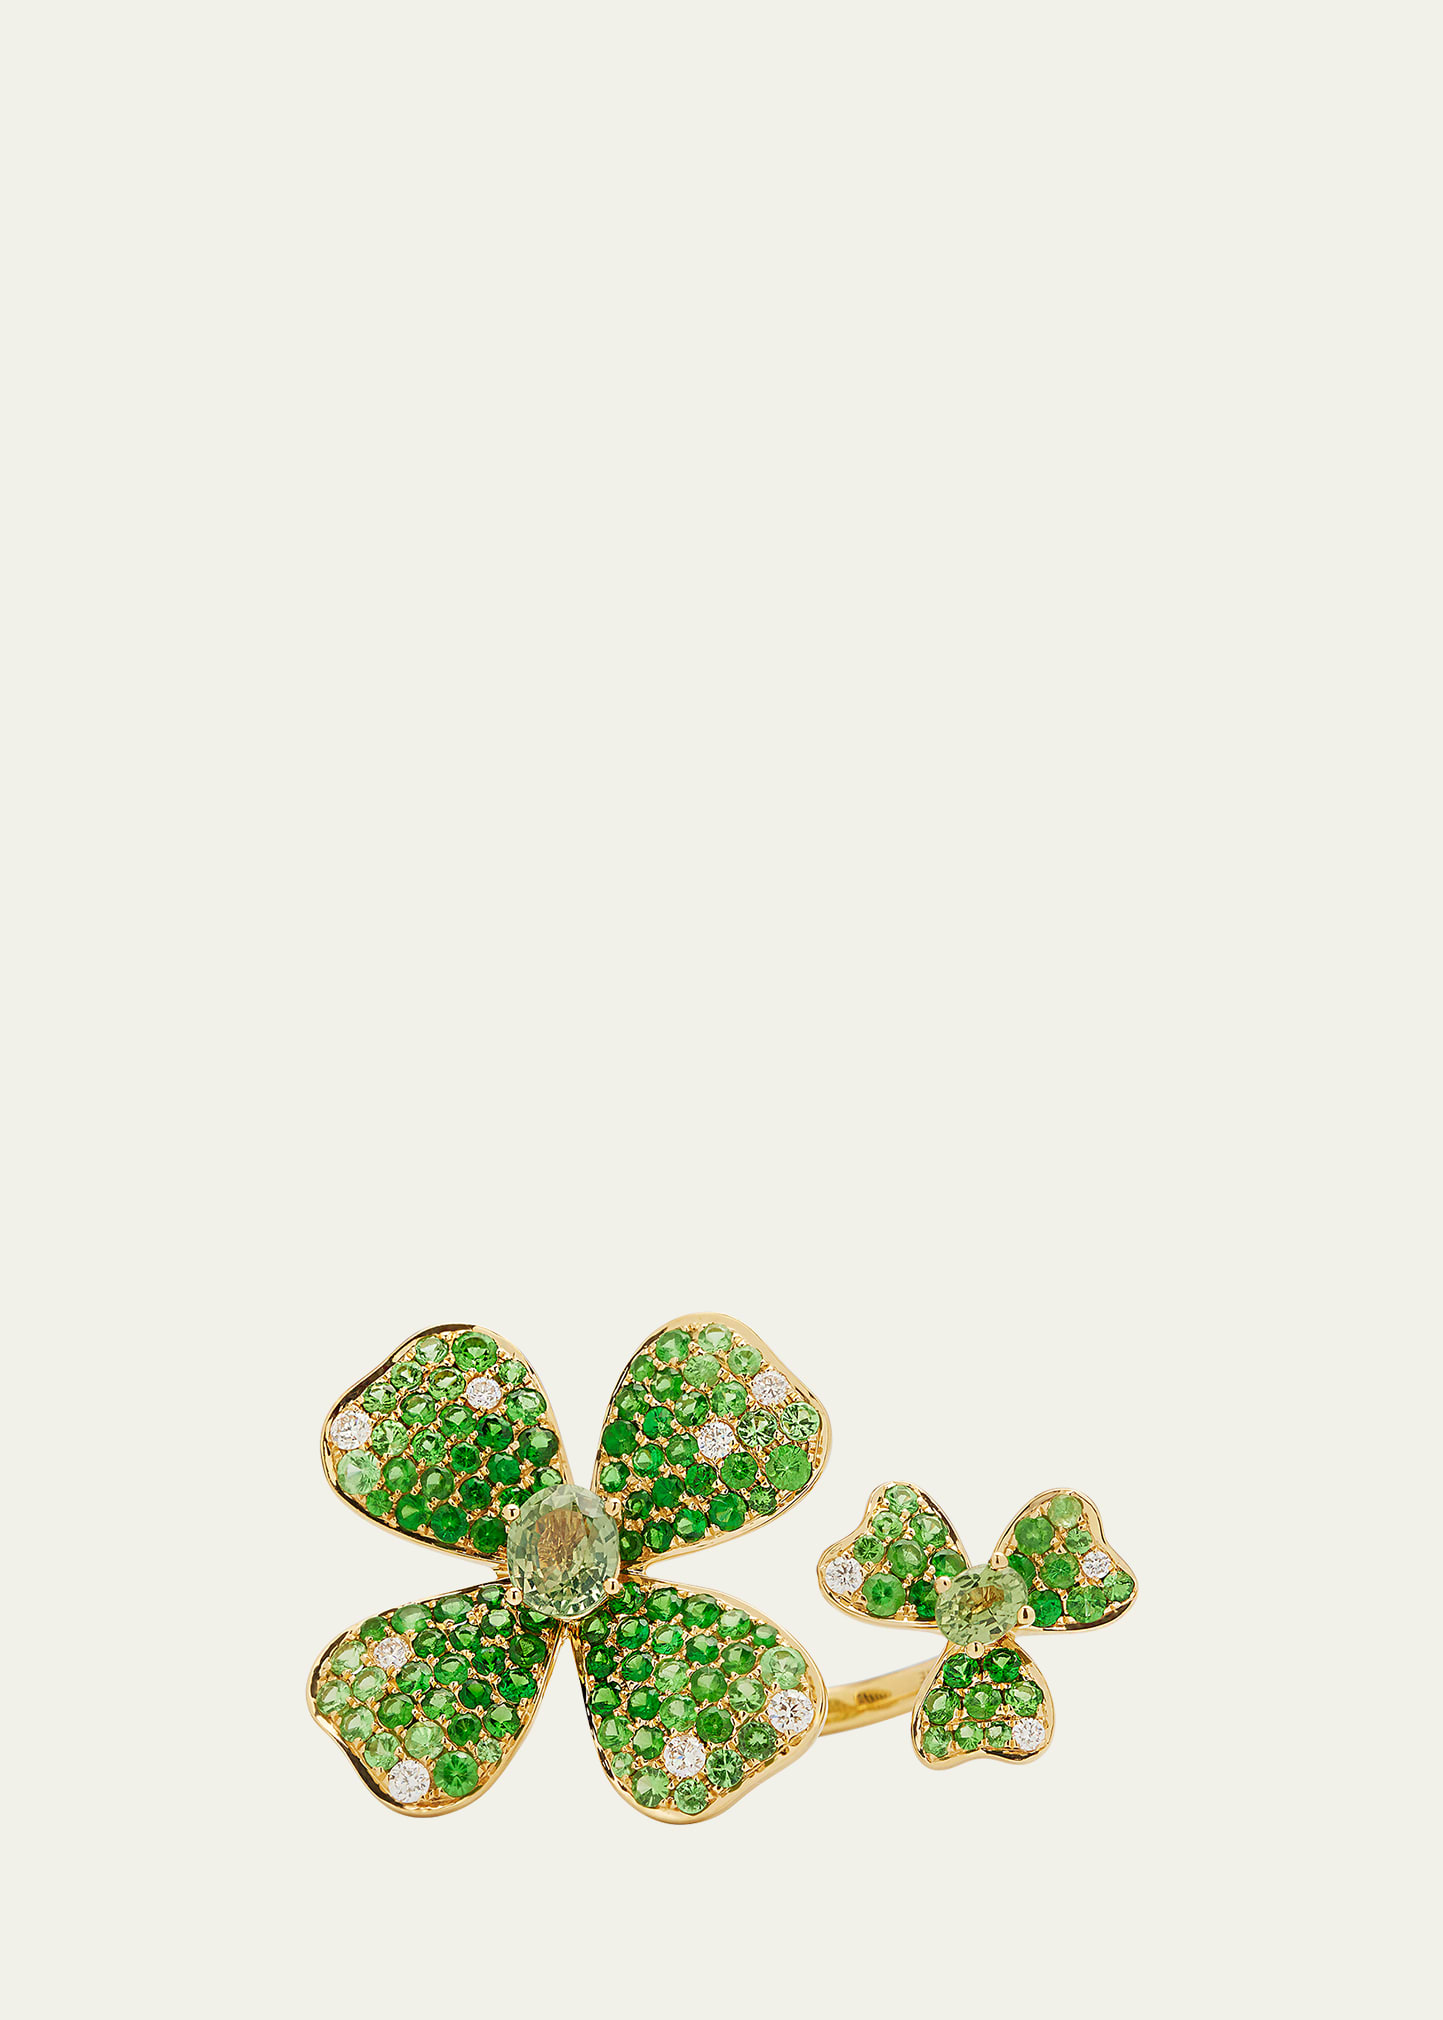 Yellow Gold Green Garnet and Green Sapphire Ring from The Flower Collection